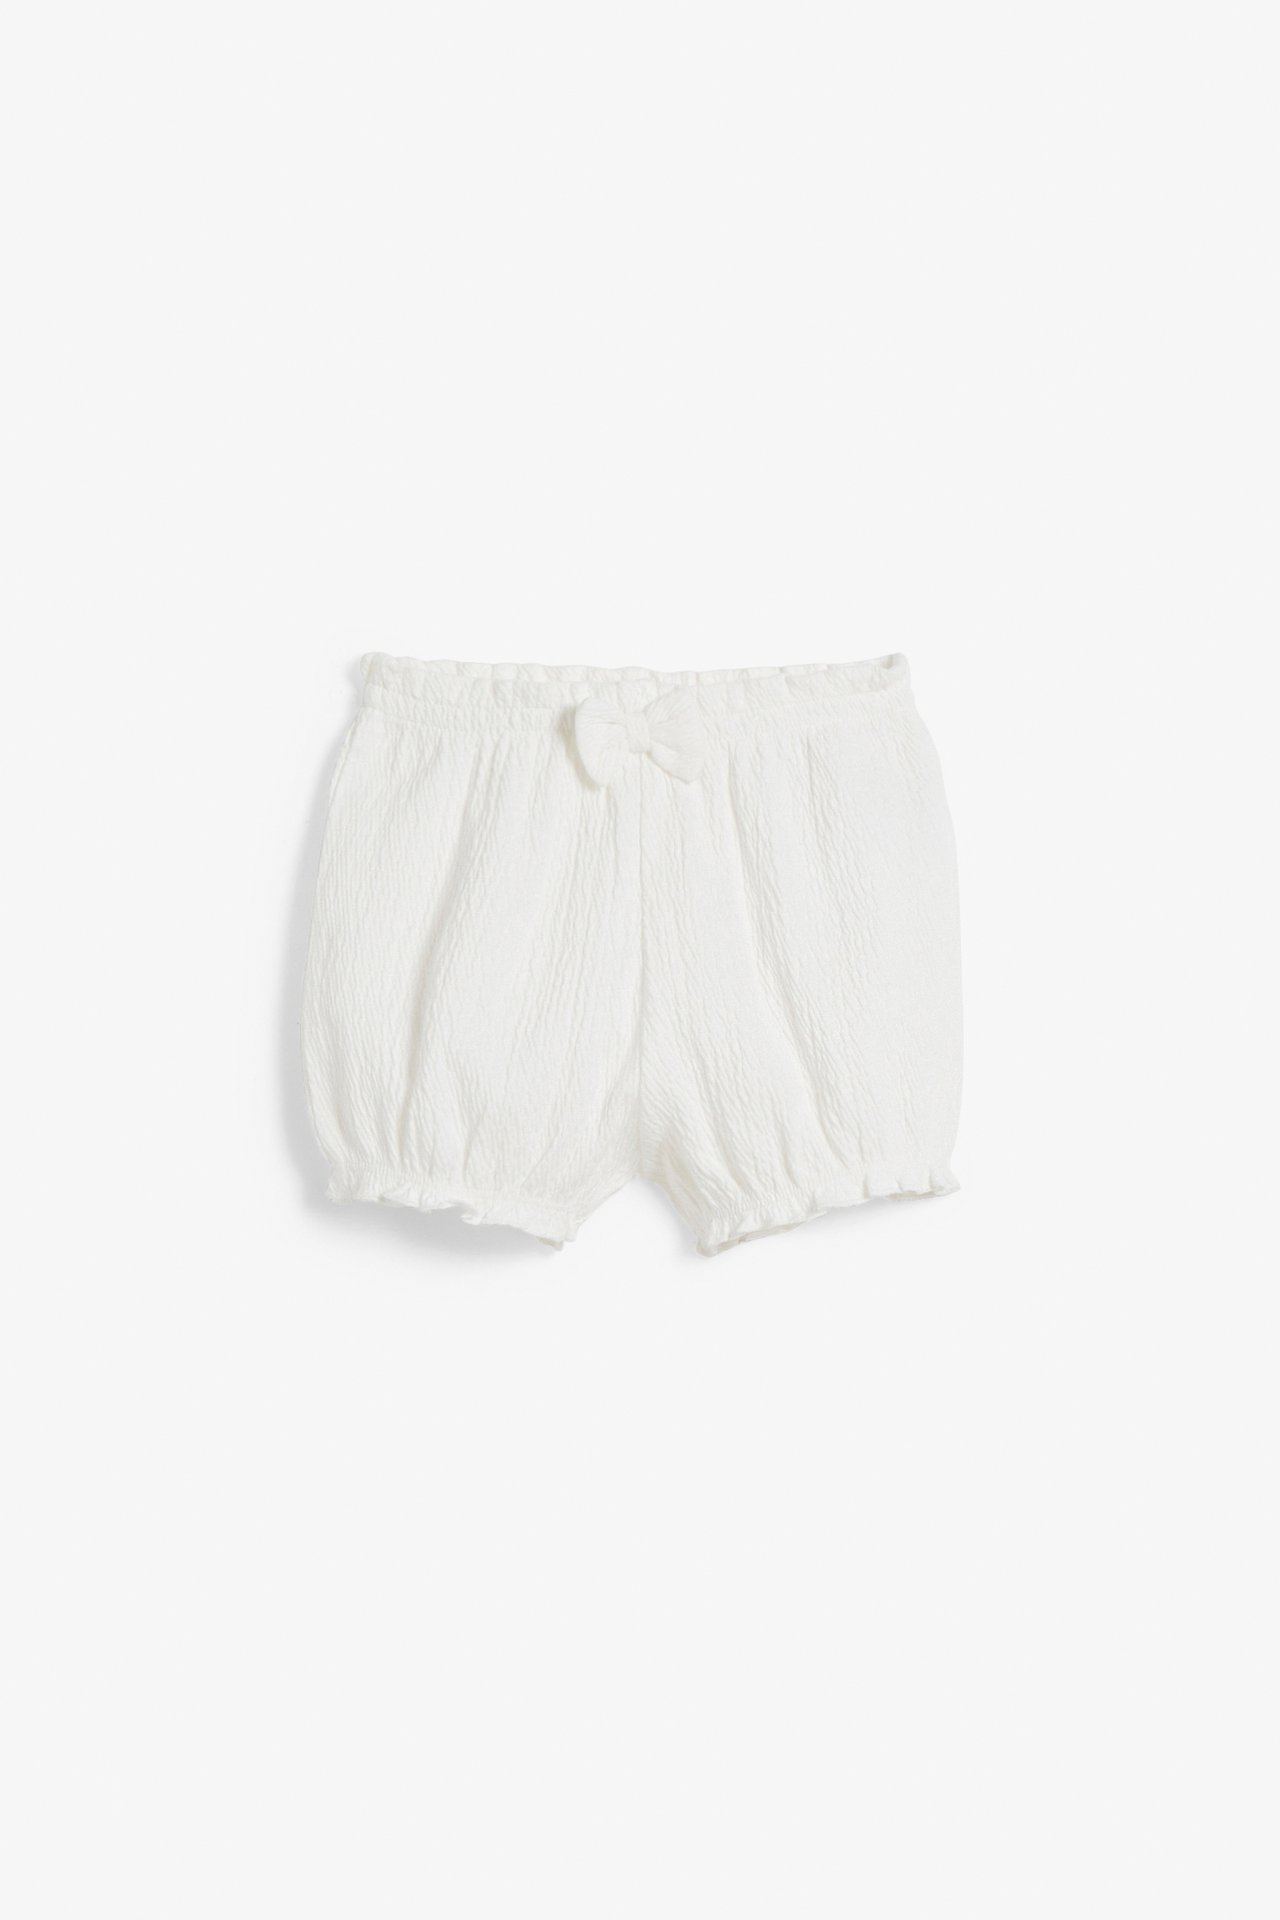 Puffshorts baby - Offwhite - 4